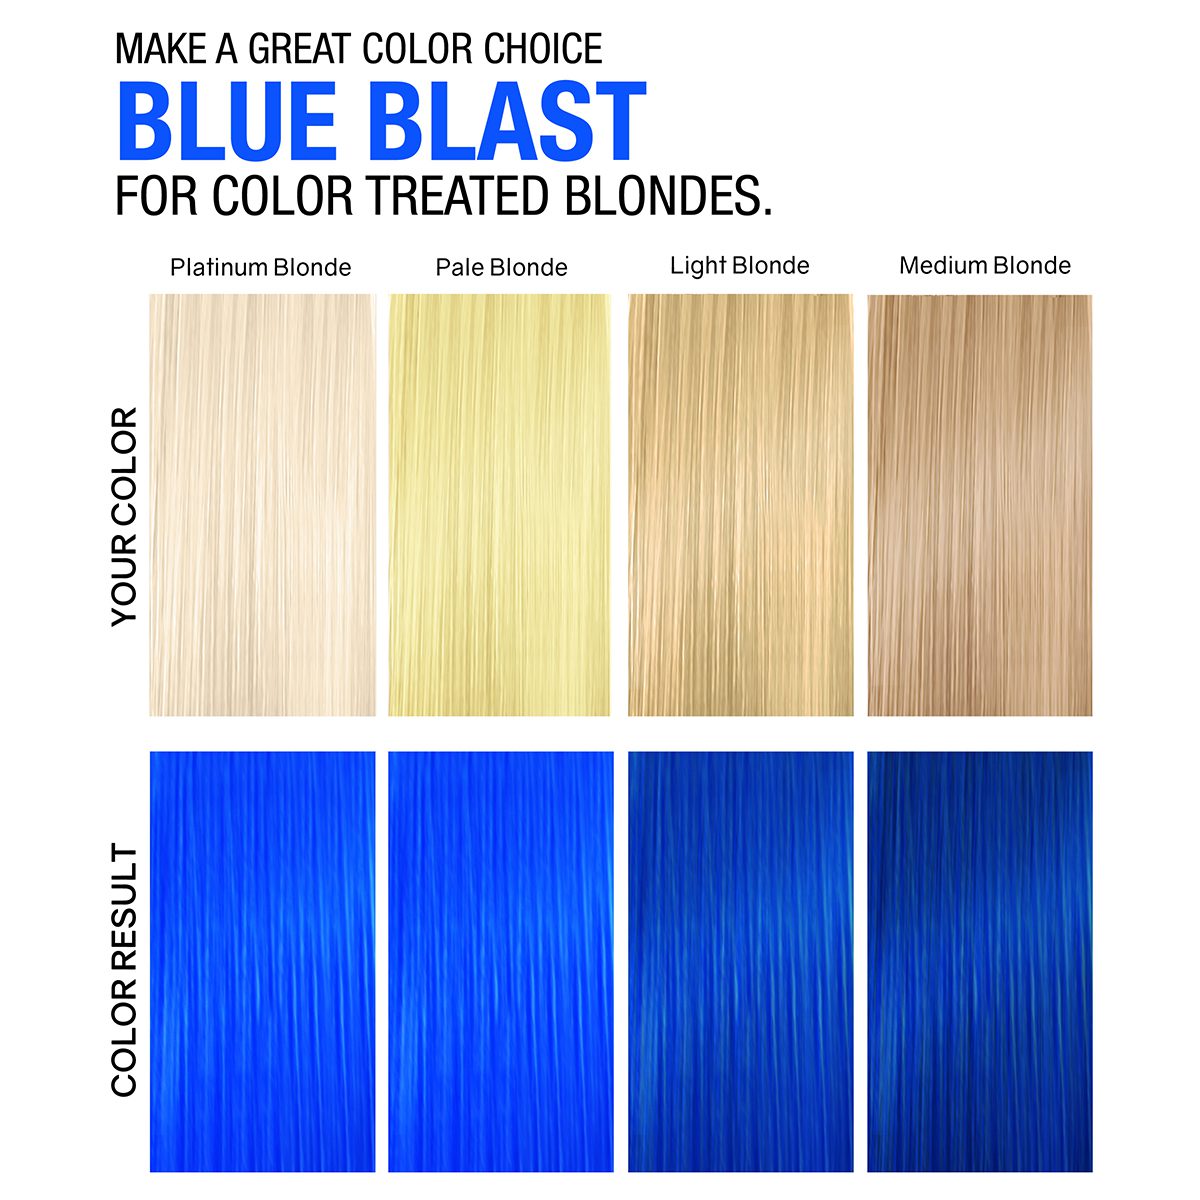 Blue Blast for color treated blondes.